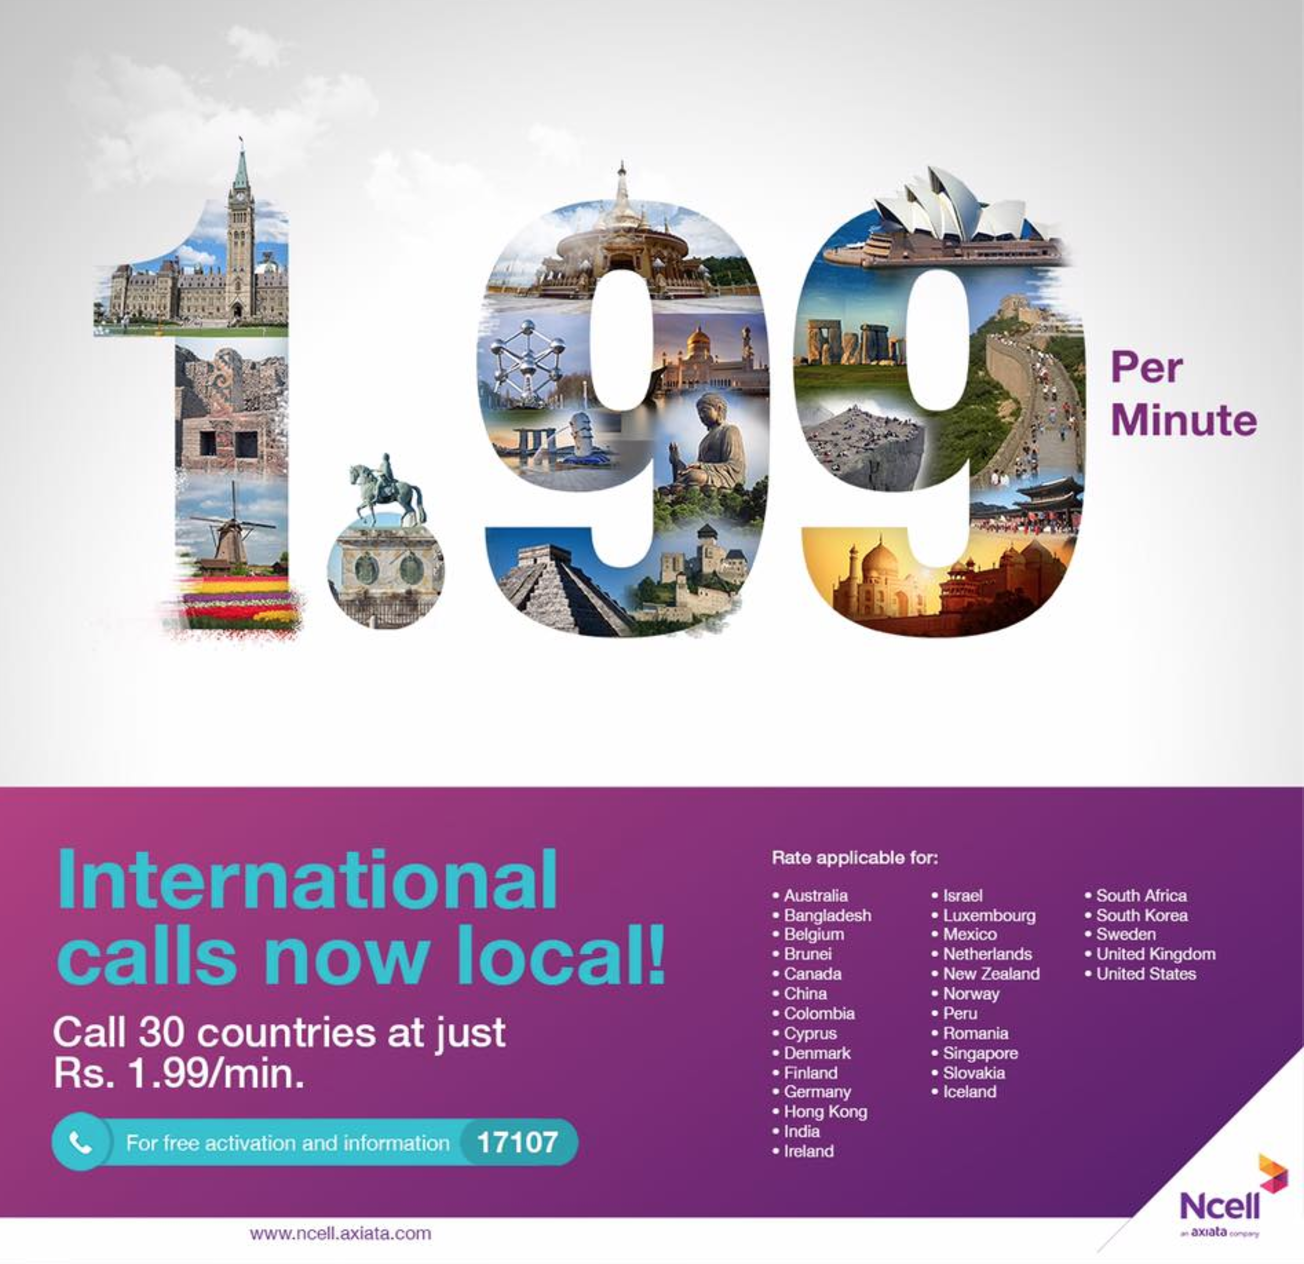 International Calls to 30 Countries at Local Rate on Ncell